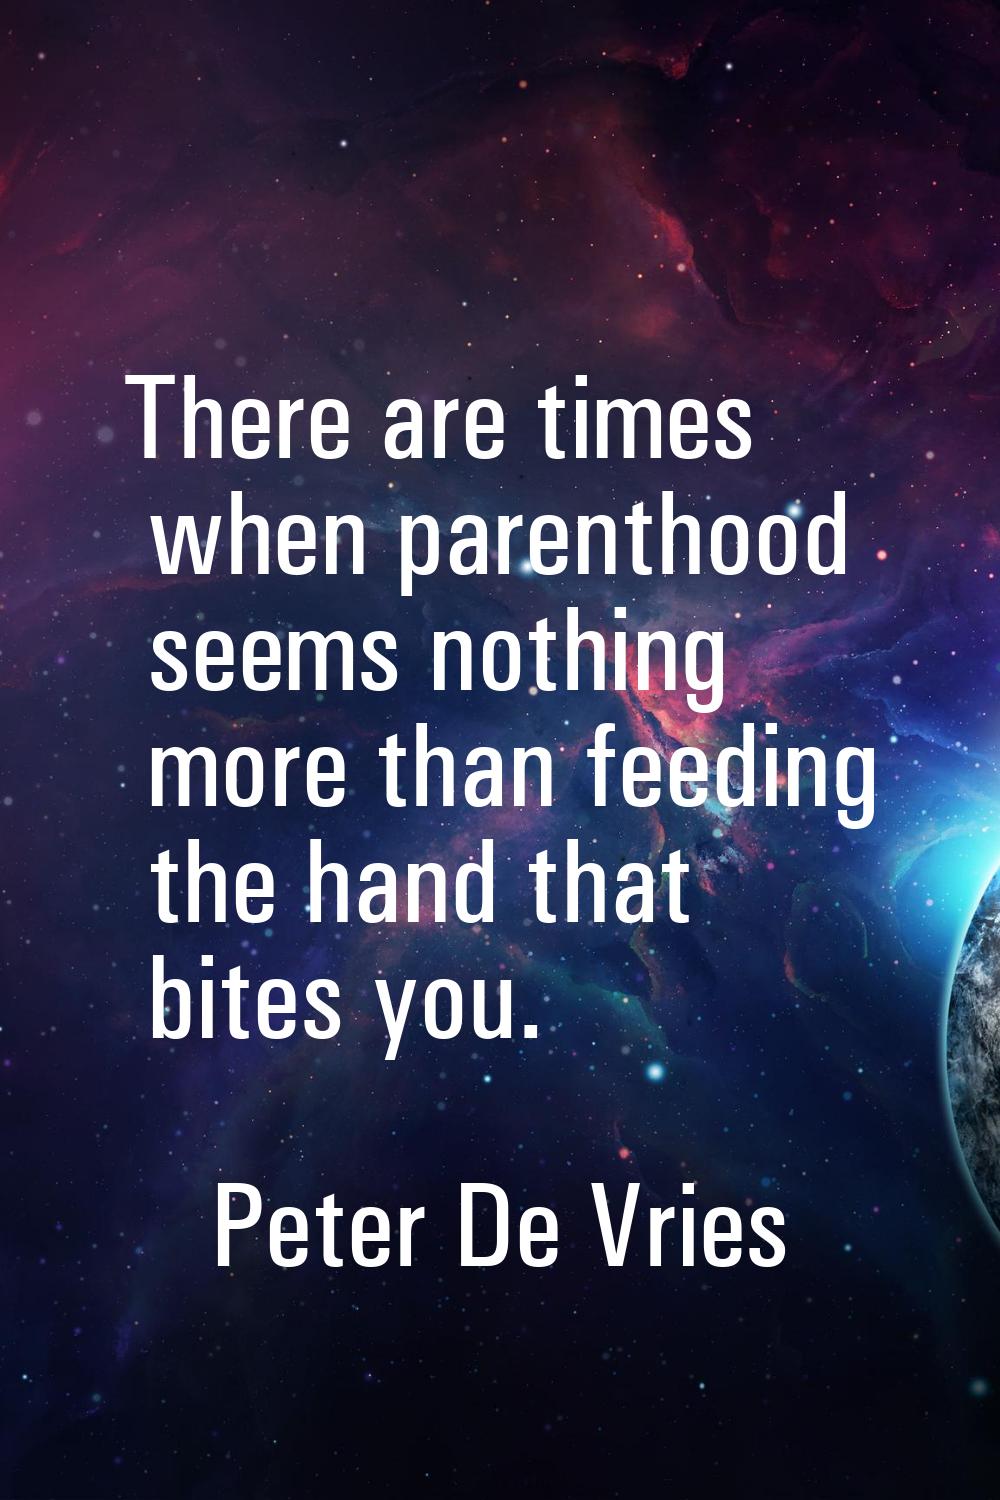 There are times when parenthood seems nothing more than feeding the hand that bites you.